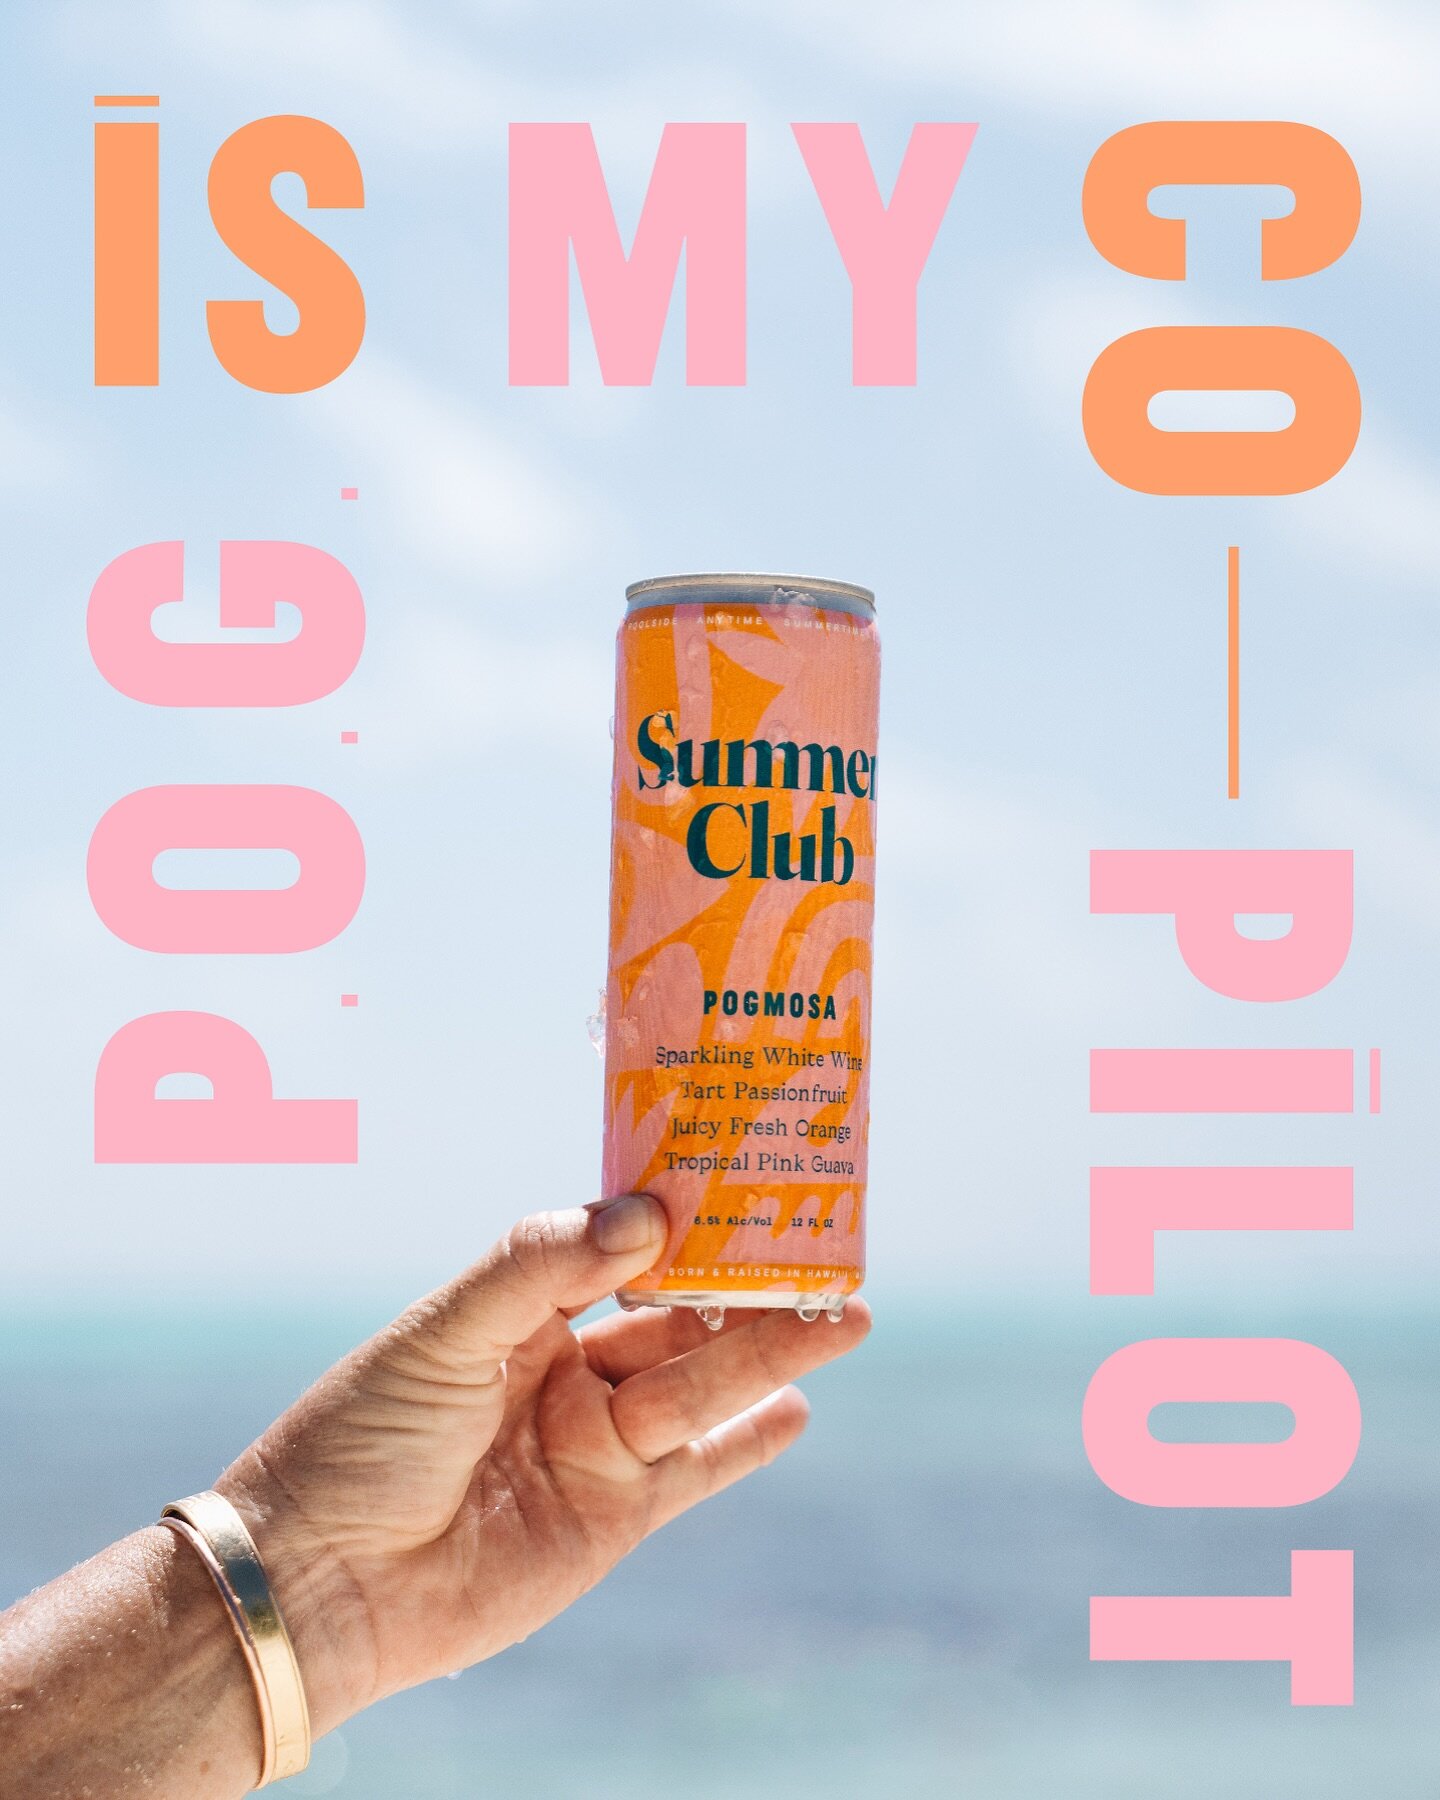 The perfect companion for a splash of summer. POGmosa is always a good idea. @drink.summerclub 

Need this on a bumper sticker. 🌈 

And because we need to say it; don&rsquo;t drink and drive, take The Bus. 🤙